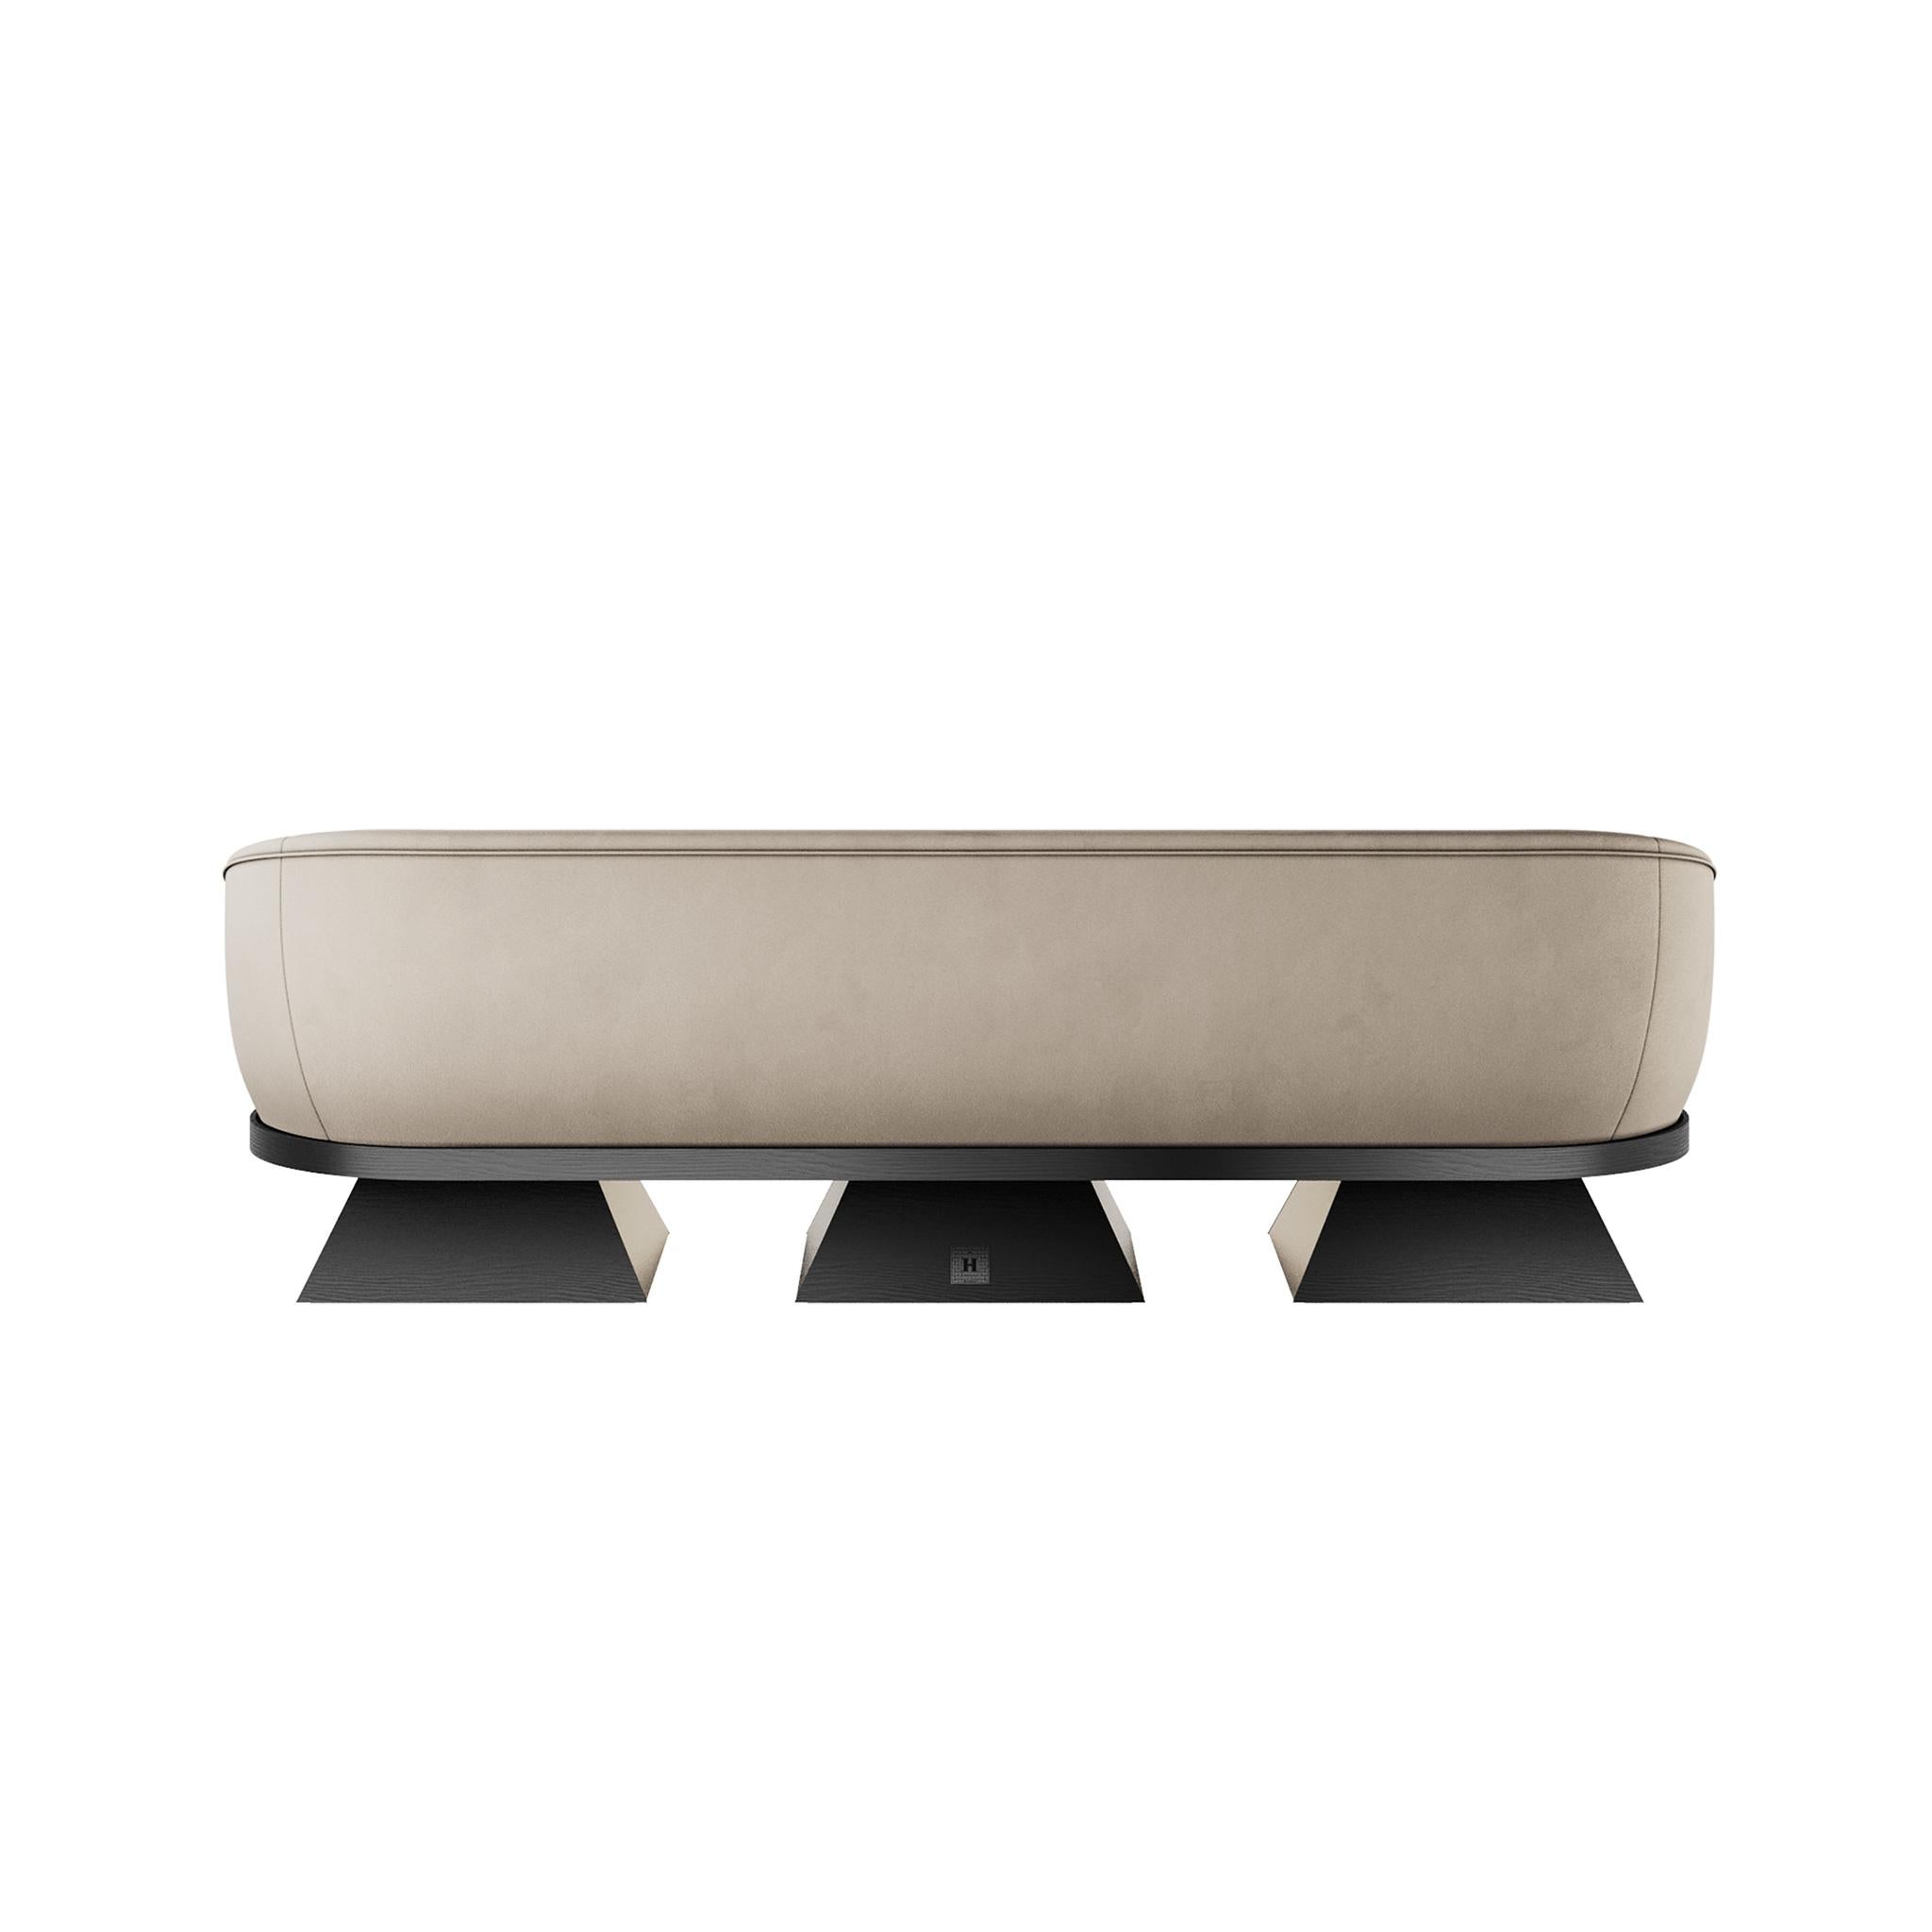 Contemporary Modern Luxury in Suede with Base in Matte Wengue Ash Wood, Details in Brass For Sale